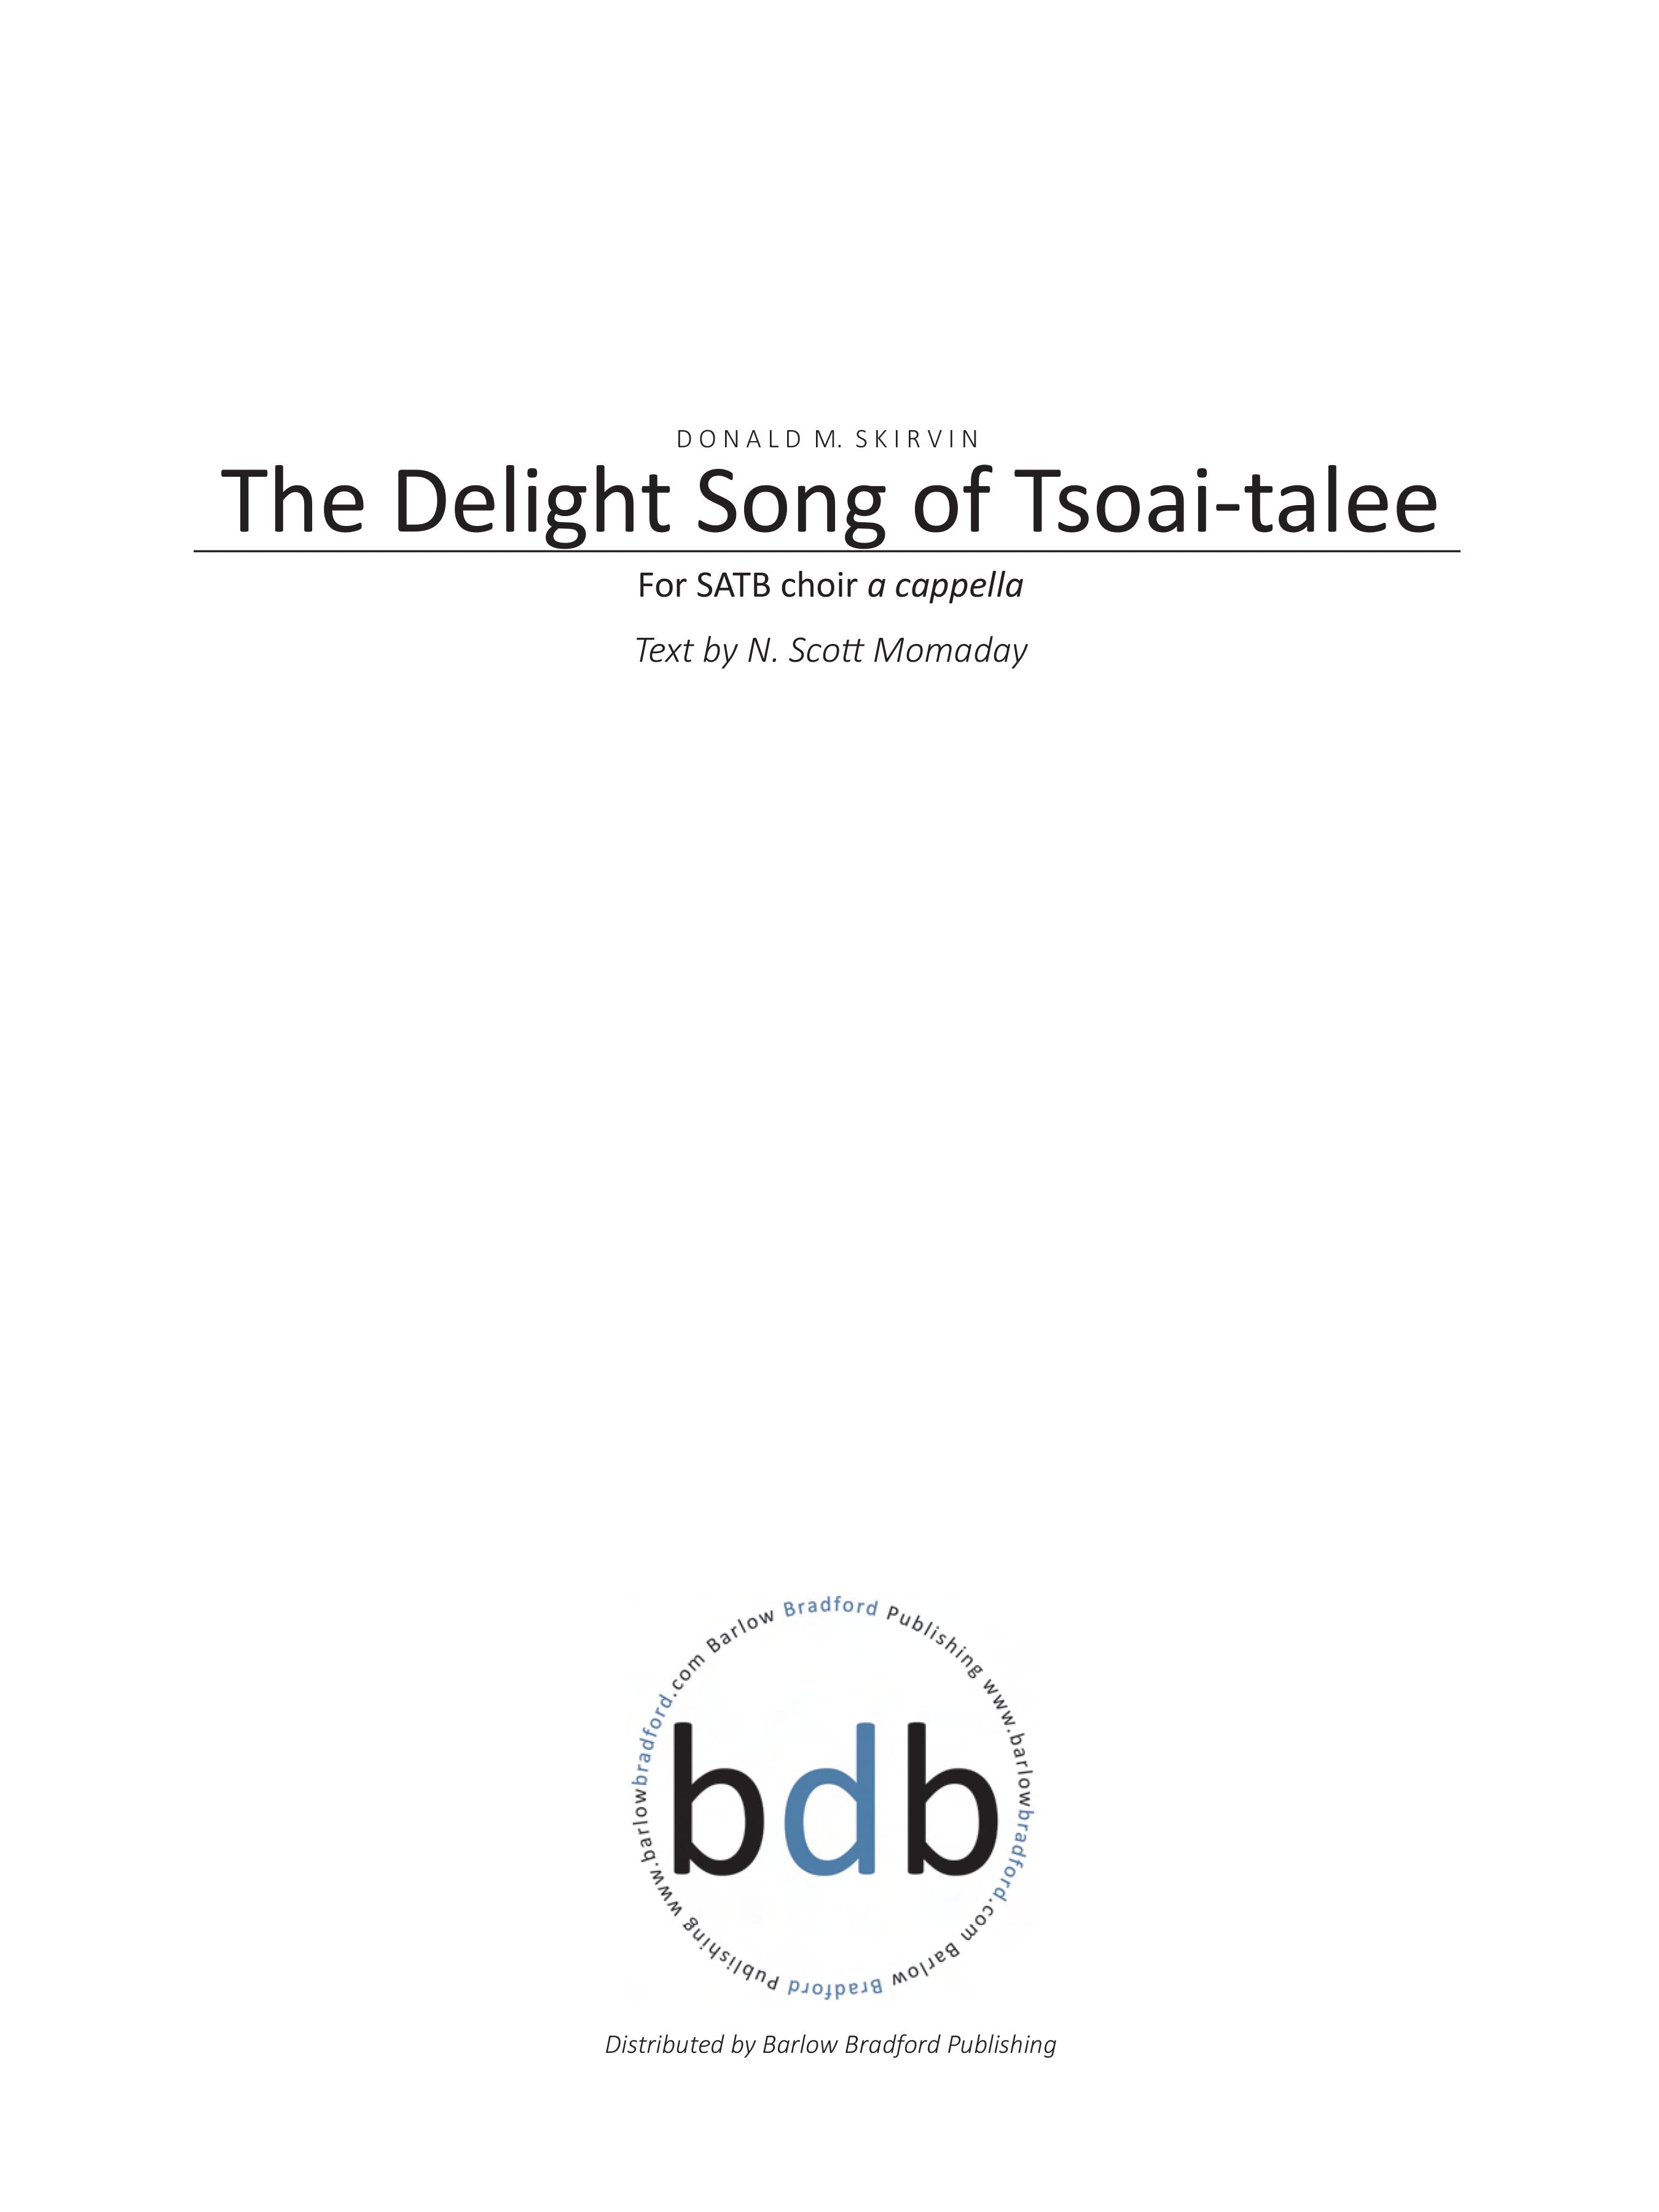 The Delight Song of Tsoai-talee